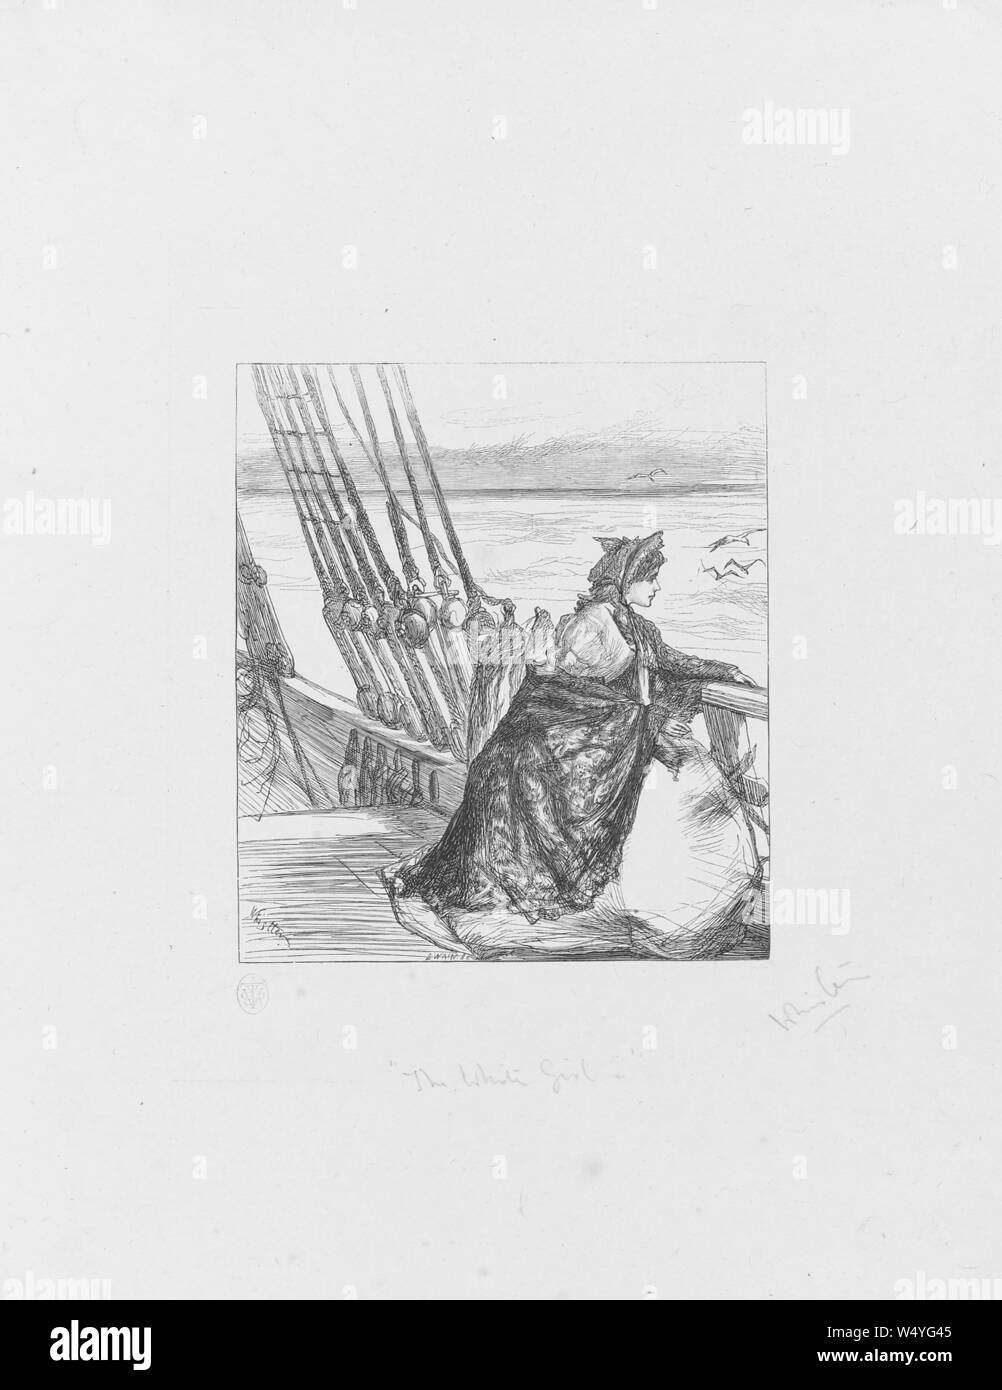 Illustration of the major's daughter on the deck of a steamship, by James McNeill Whistler, 1862. From the New York Public Library. () Stock Photo